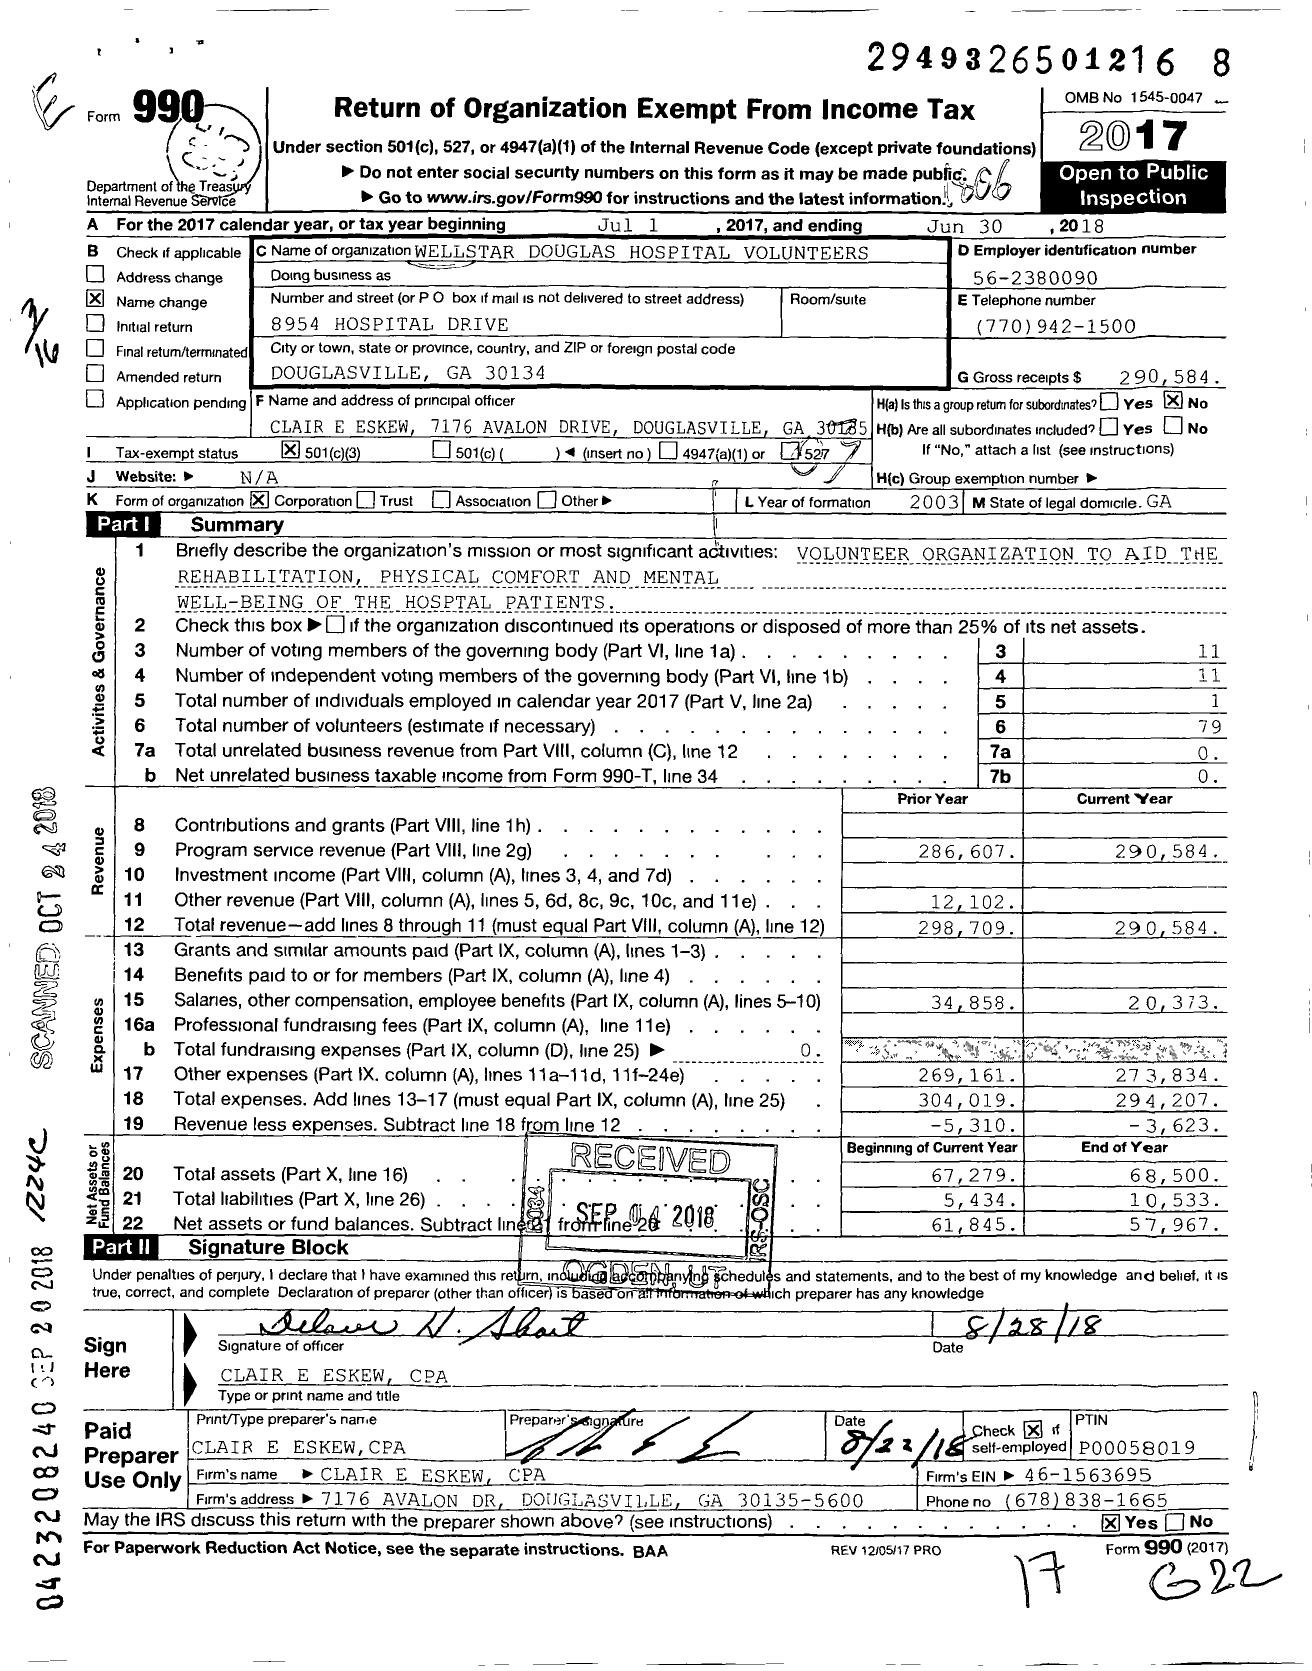 Image of first page of 2017 Form 990 for Wellstar Douglas Hospital Volunteers